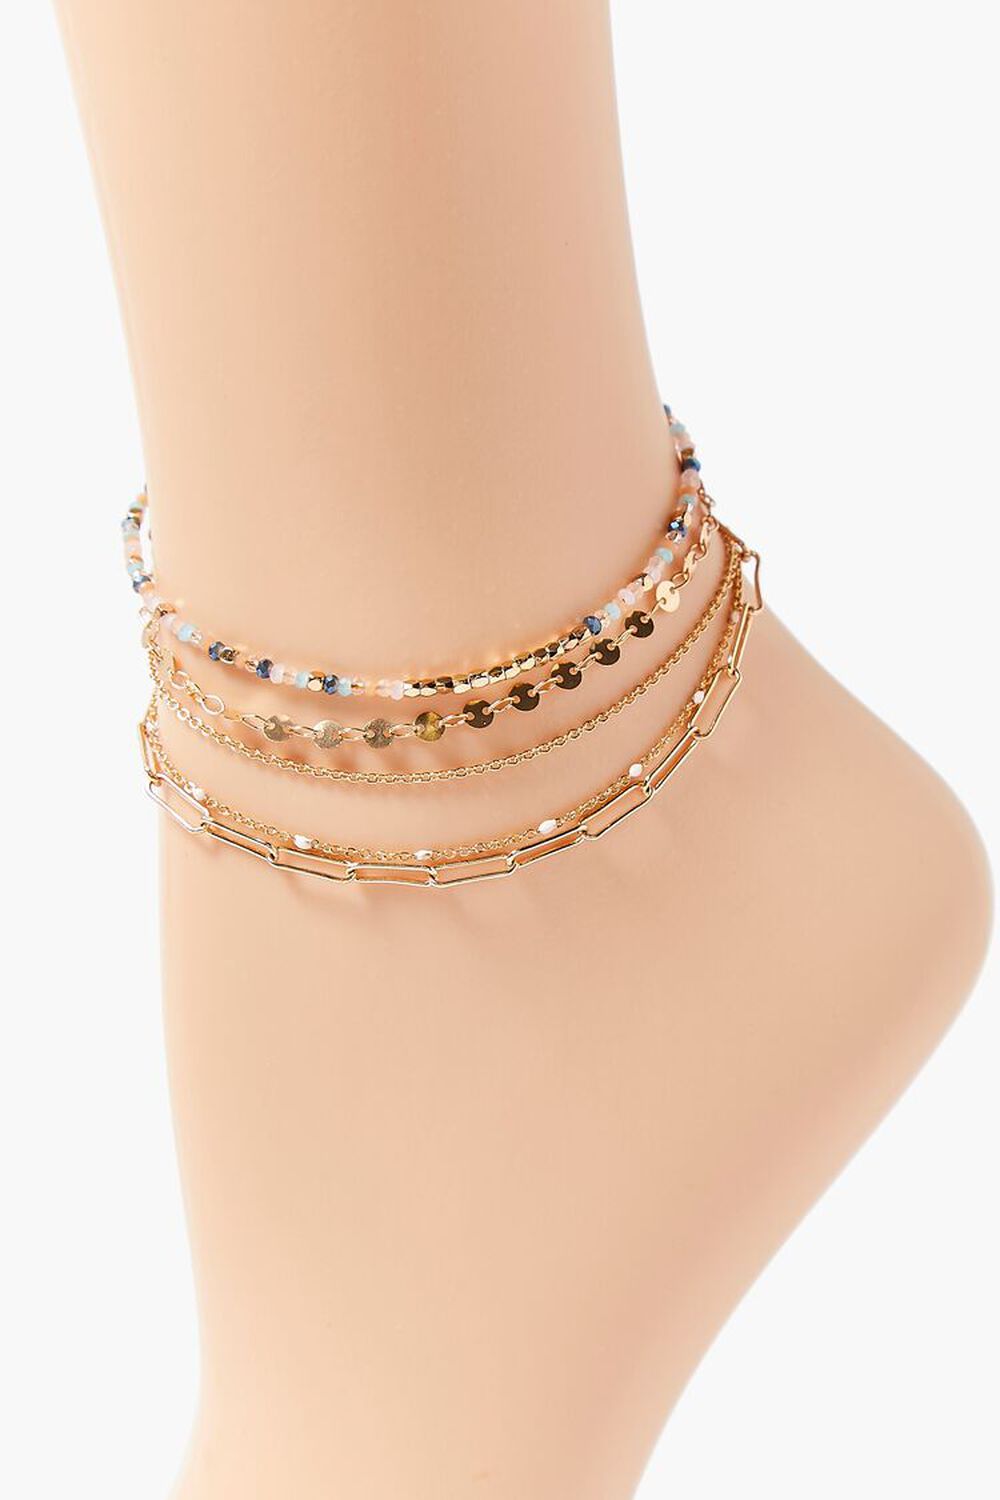 Beaded Chain Anklet Set, image 2